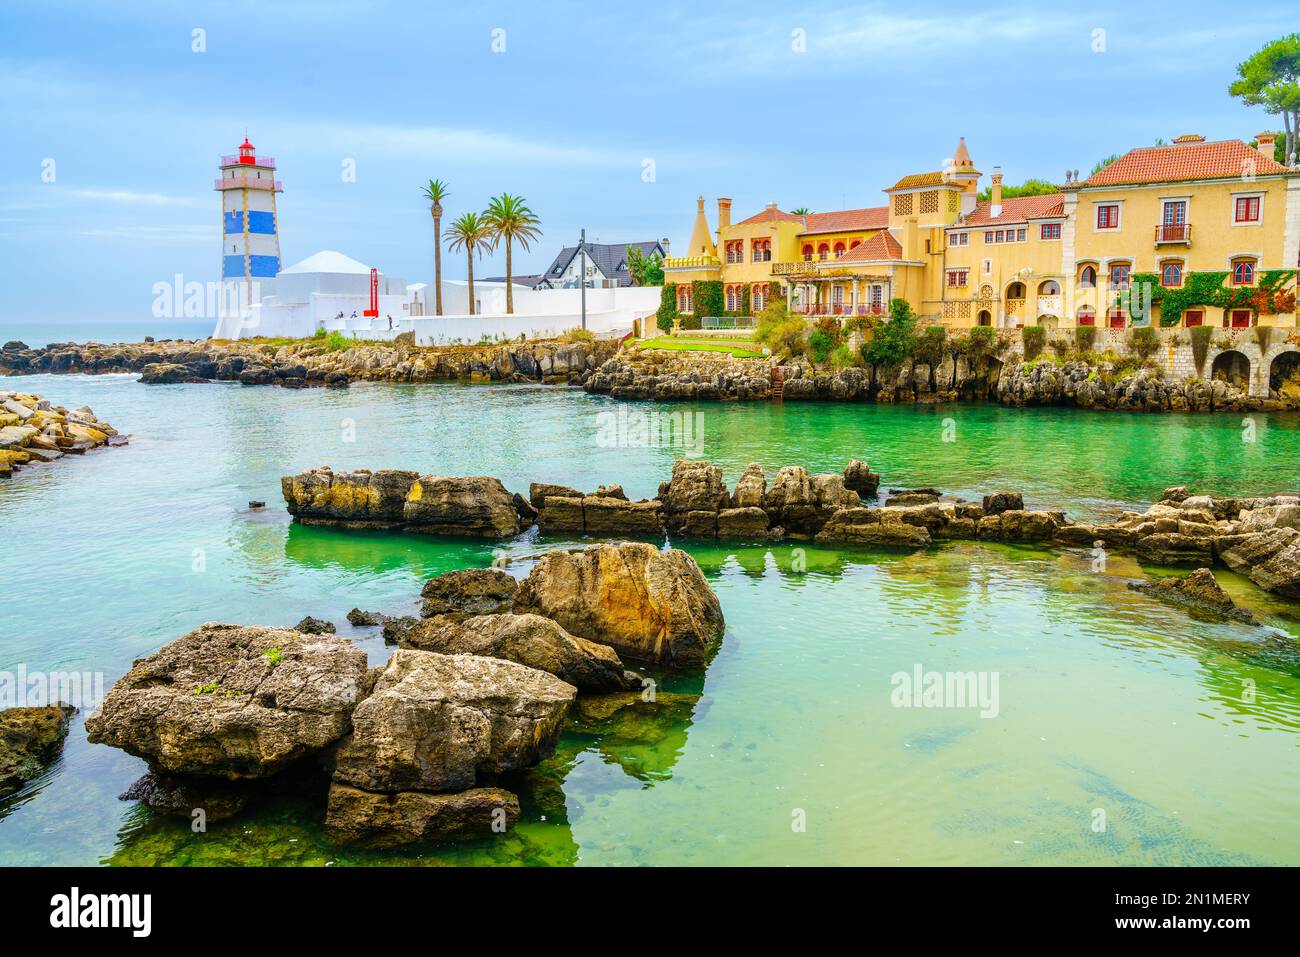 View of Santa Maria Lighthouse and Santa Maria House Museum in Cascais, Portugal. Stock Photo